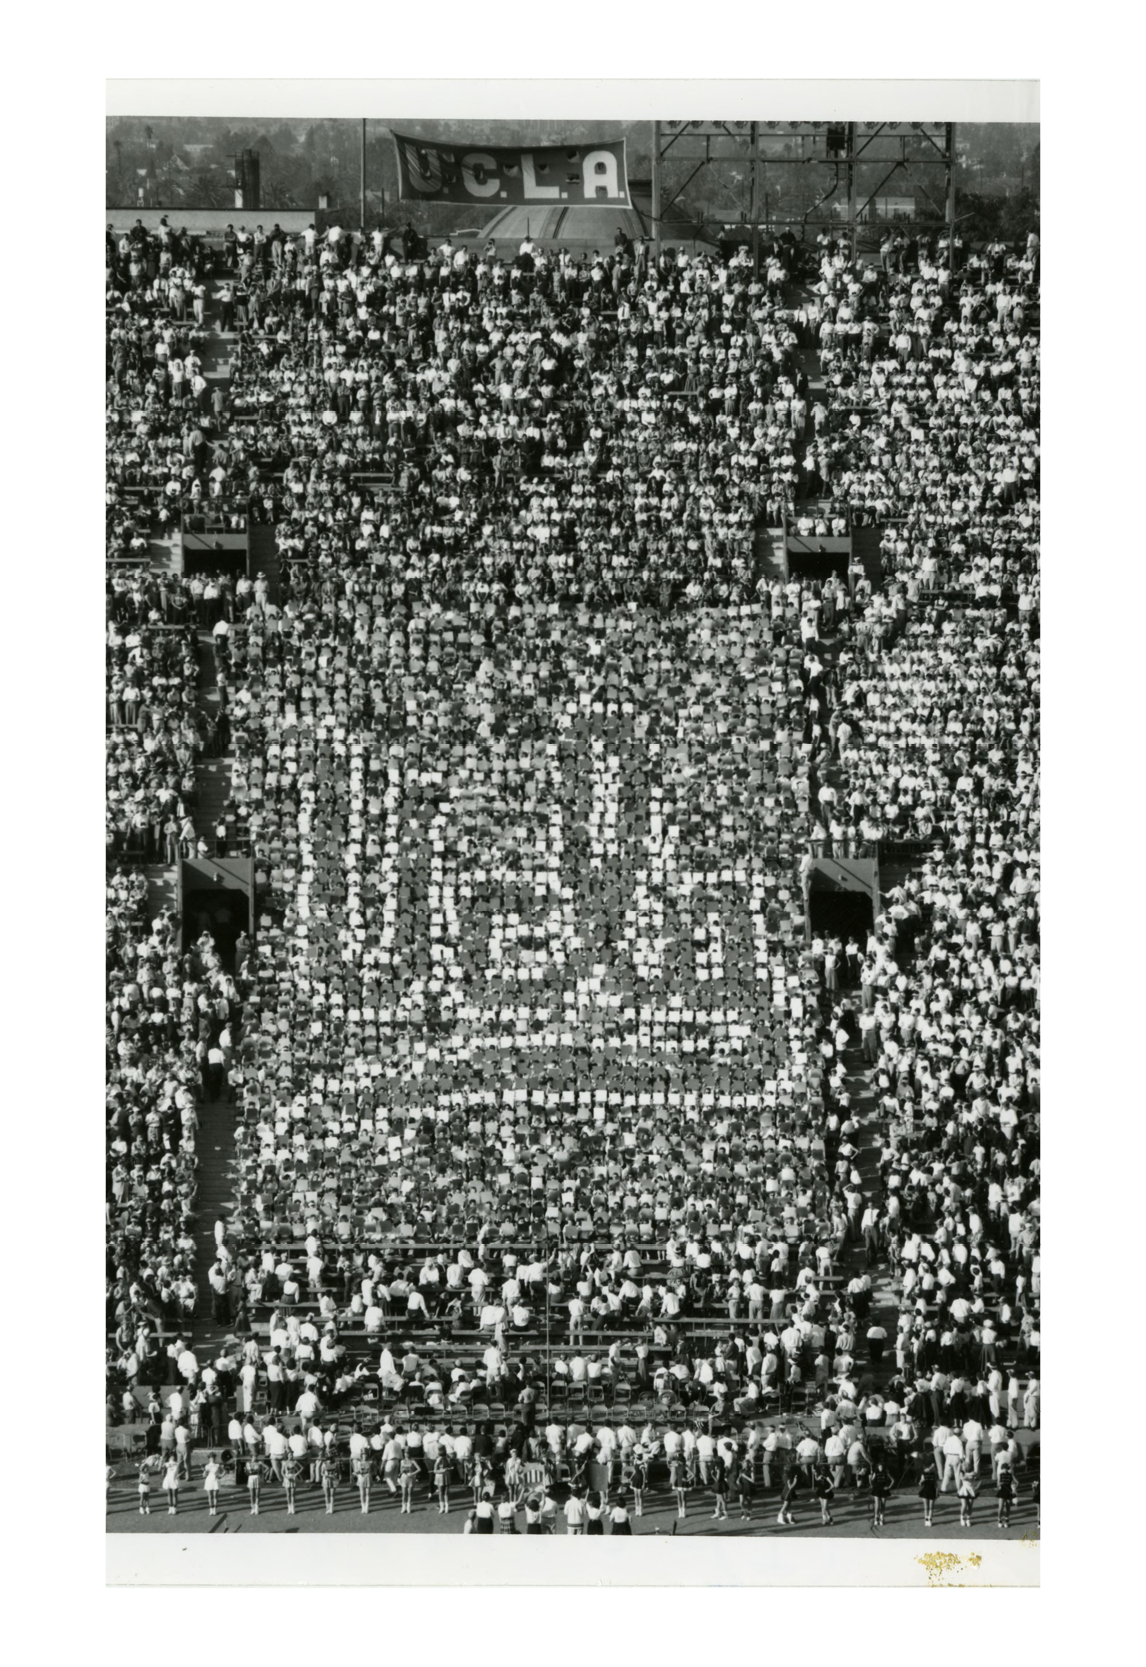 A black and white photograph from 1955 of students at a football game holding up cards spelling out "UCLA."